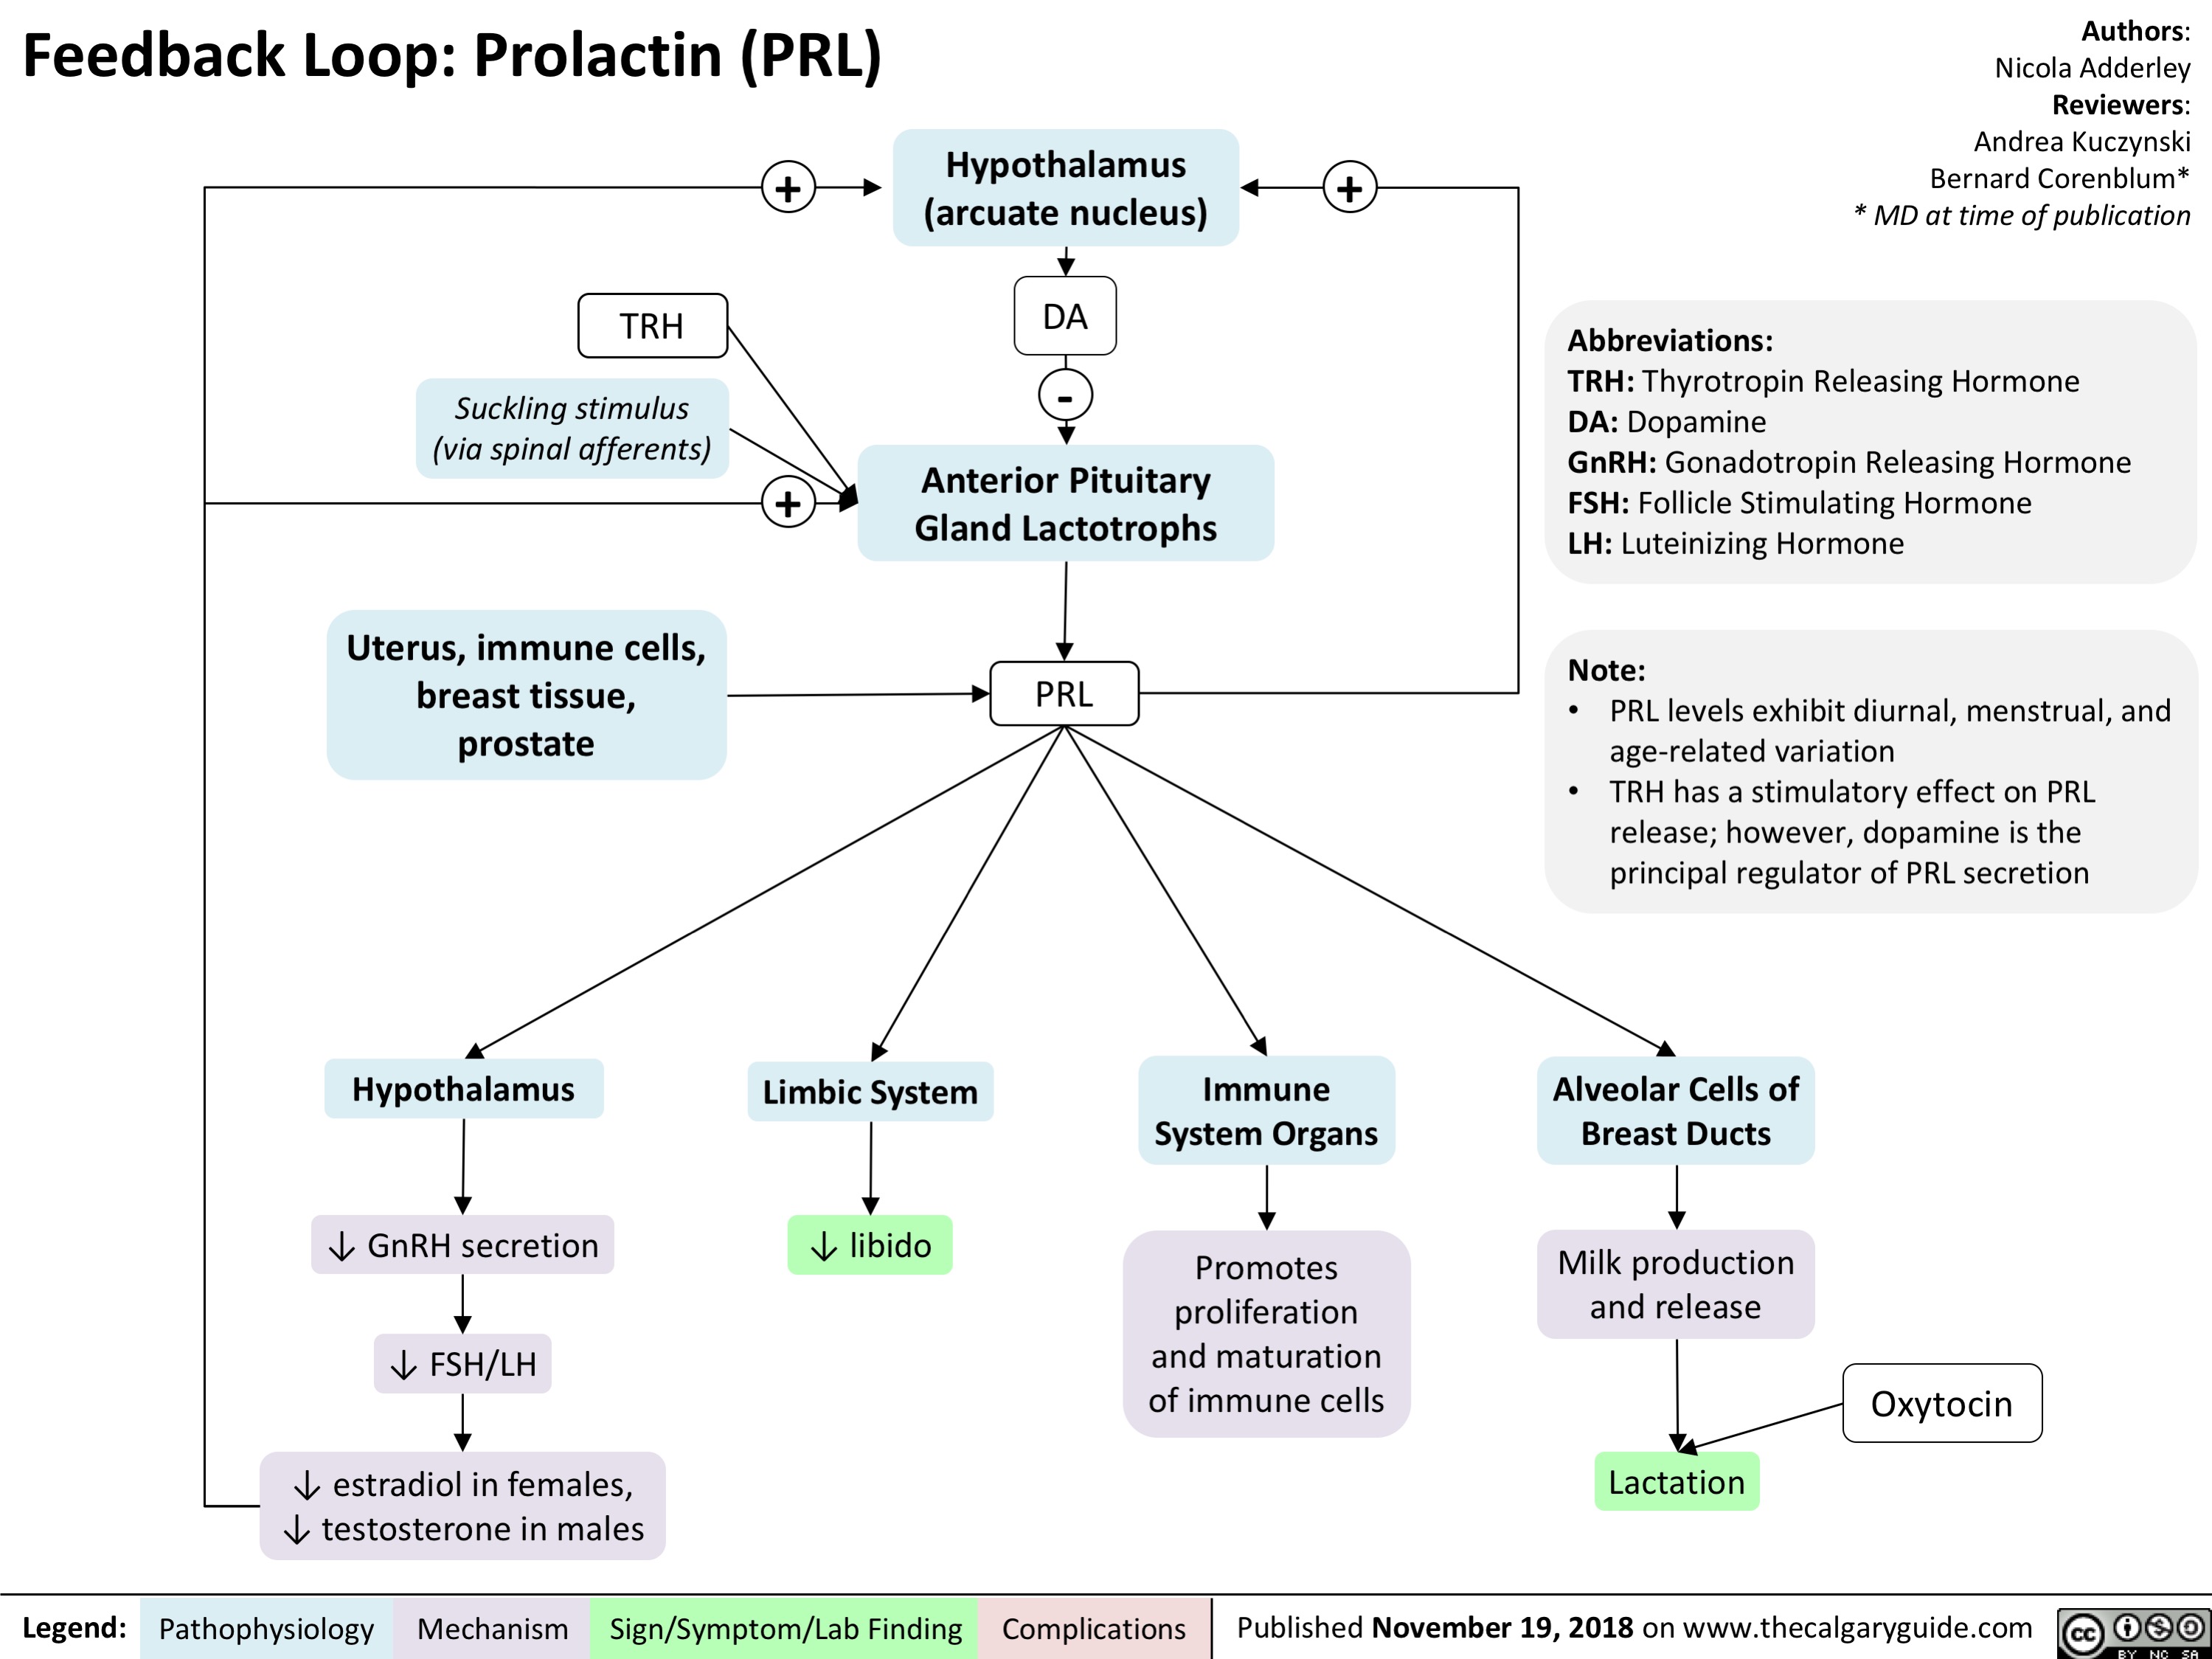 Feedback Loop: Prolactin (PRL)
Authors: Nicola Adderley Reviewers: Andrea Kuczynski Bernard Corenblum* * MD at time of publication
Abbreviations:
TRH: Thyrotropin Releasing Hormone
DA: Dopamine
GnRH: Gonadotropin Releasing Hormone FSH: Follicle Stimulating Hormone
LH: Luteinizing Hormone
Note:
• PRL levels exhibit diurnal, menstrual, and age-related variation
• TRH has a stimulatory effect on PRL release; however, dopamine is the principal regulator of PRL secretion
Alveolar Cells of Breast Ducts
Milk production and release
Lactation
         TRH
Suckling stimulus (via spinal afferents)
+
+
Hypothalamus + (arcuate nucleus)
DA
-
Anterior Pituitary Gland Lactotrophs
        Uterus, immune cells, breast tissue, prostate
PRL
         Hypothalamus
↓ GnRH secretion ↓ FSH/LH
↓ estradiol in females, ↓ testosterone in males
Limbic System
↓ libido
Immune System Organs
Promotes proliferation and maturation of immune cells
            Oxytocin
     Legend:
 Pathophysiology
 Mechanism
Sign/Symptom/Lab Finding
  Complications
Published November 19, 2018 on www.thecalgaryguide.com
   